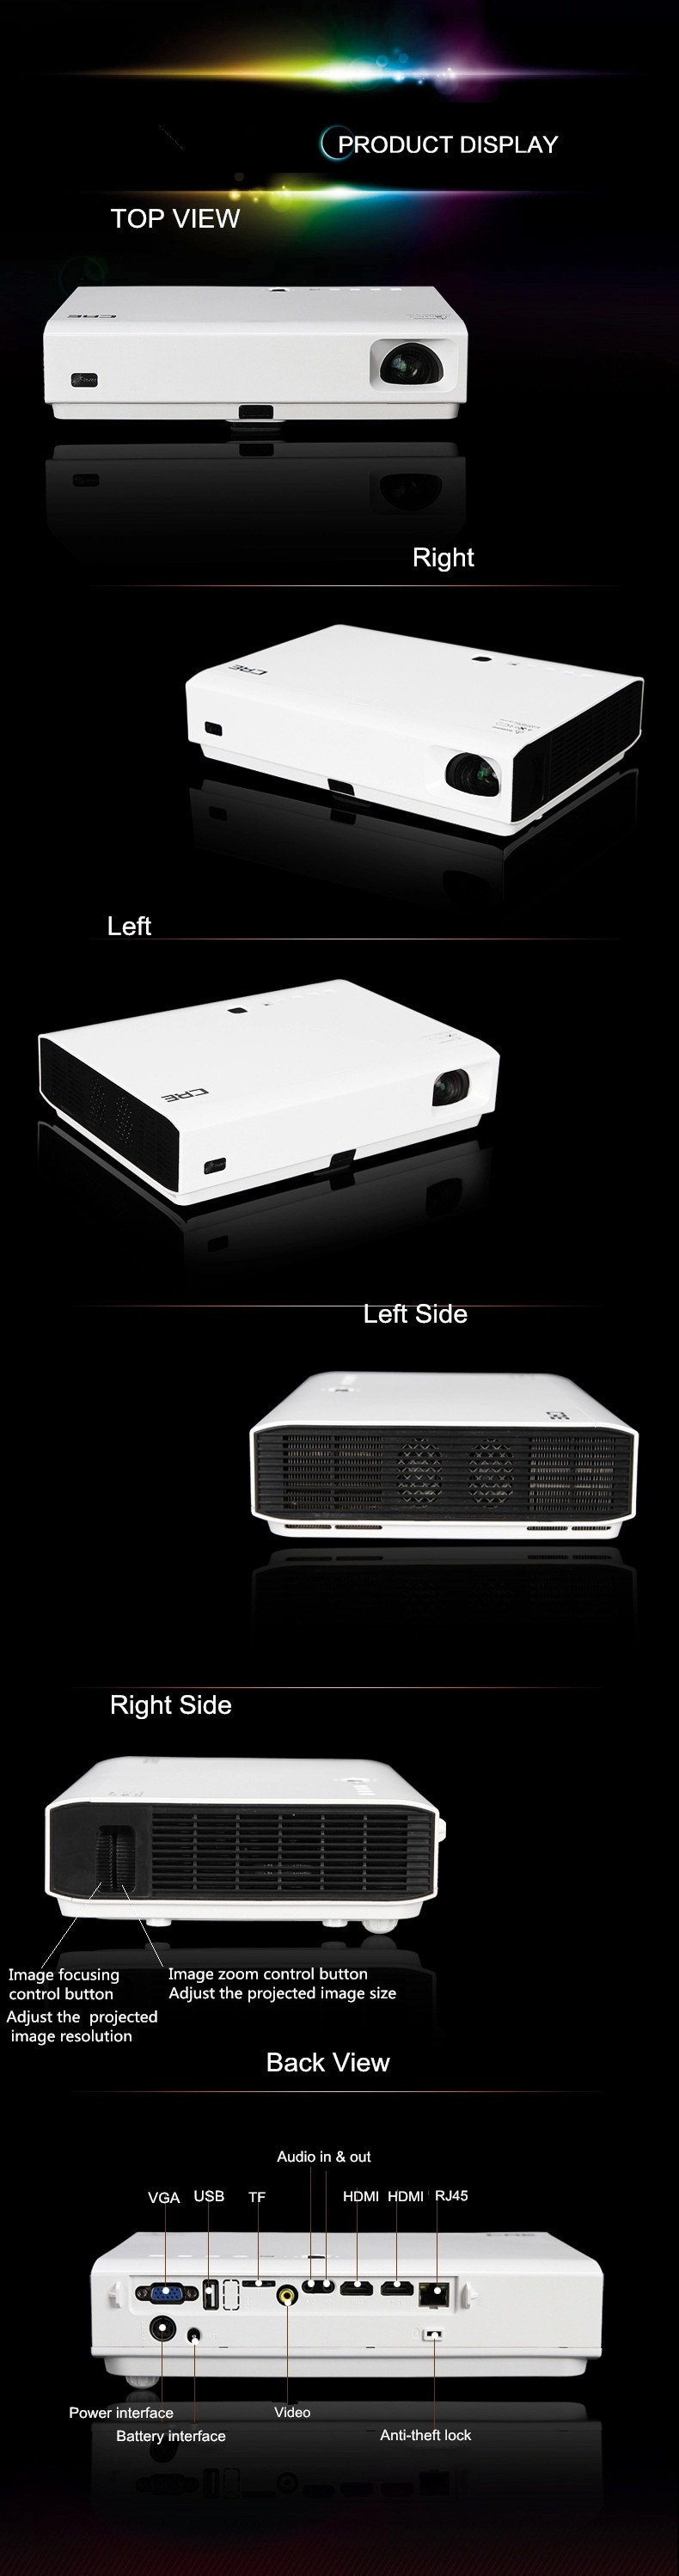 Hot Selling 3D LED Laser Business Show Store Projector